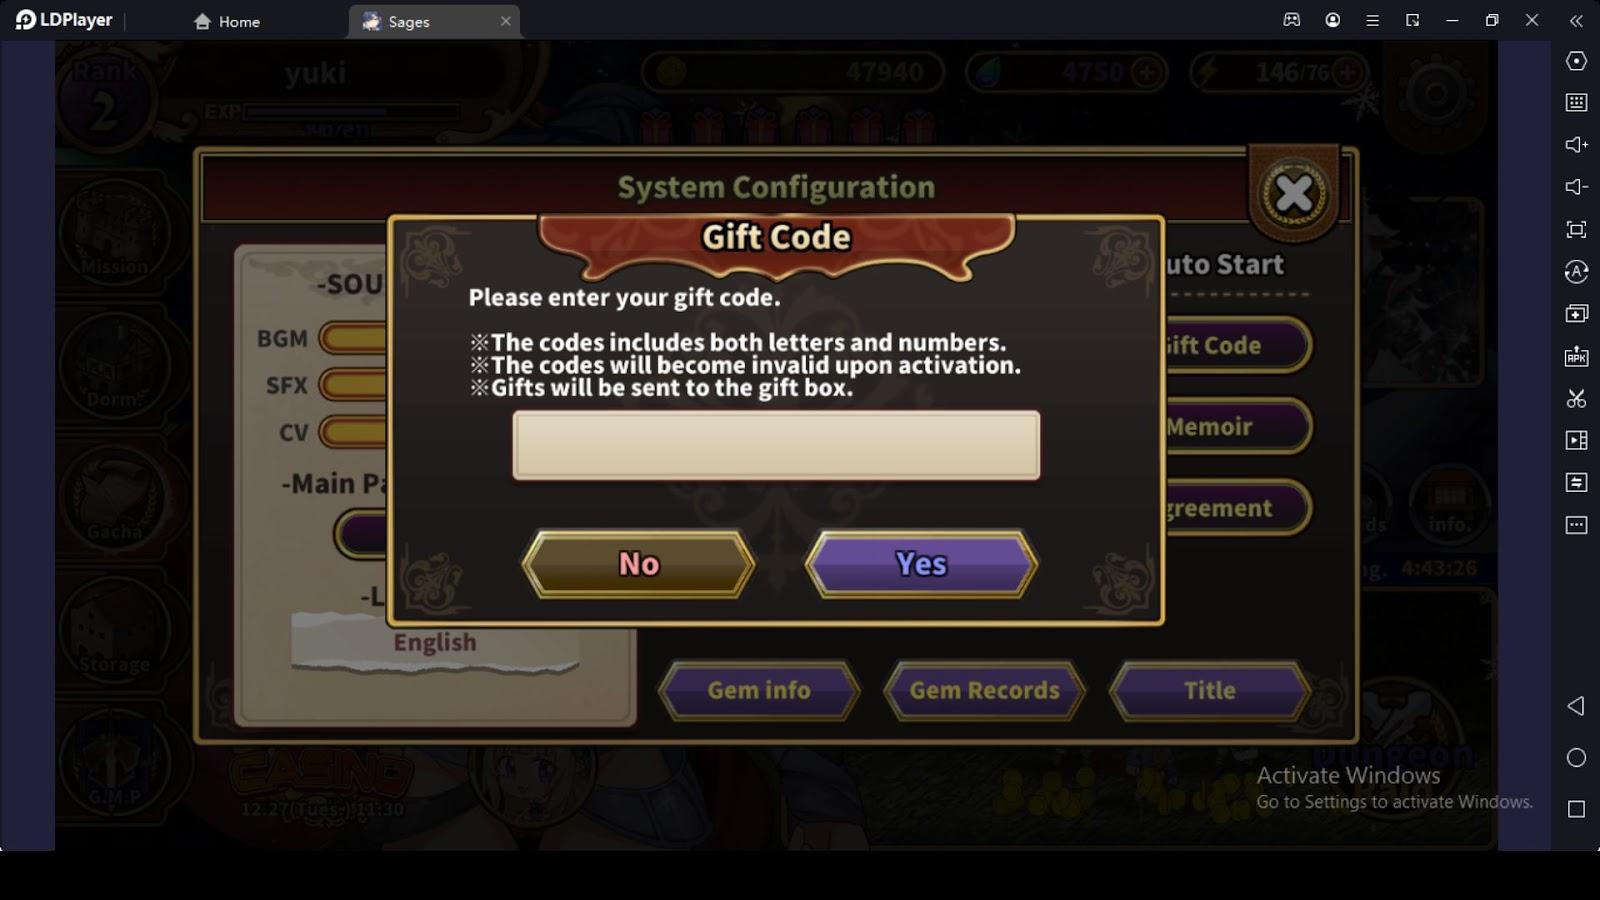 How to Redeem Your Alliance Sages Codes